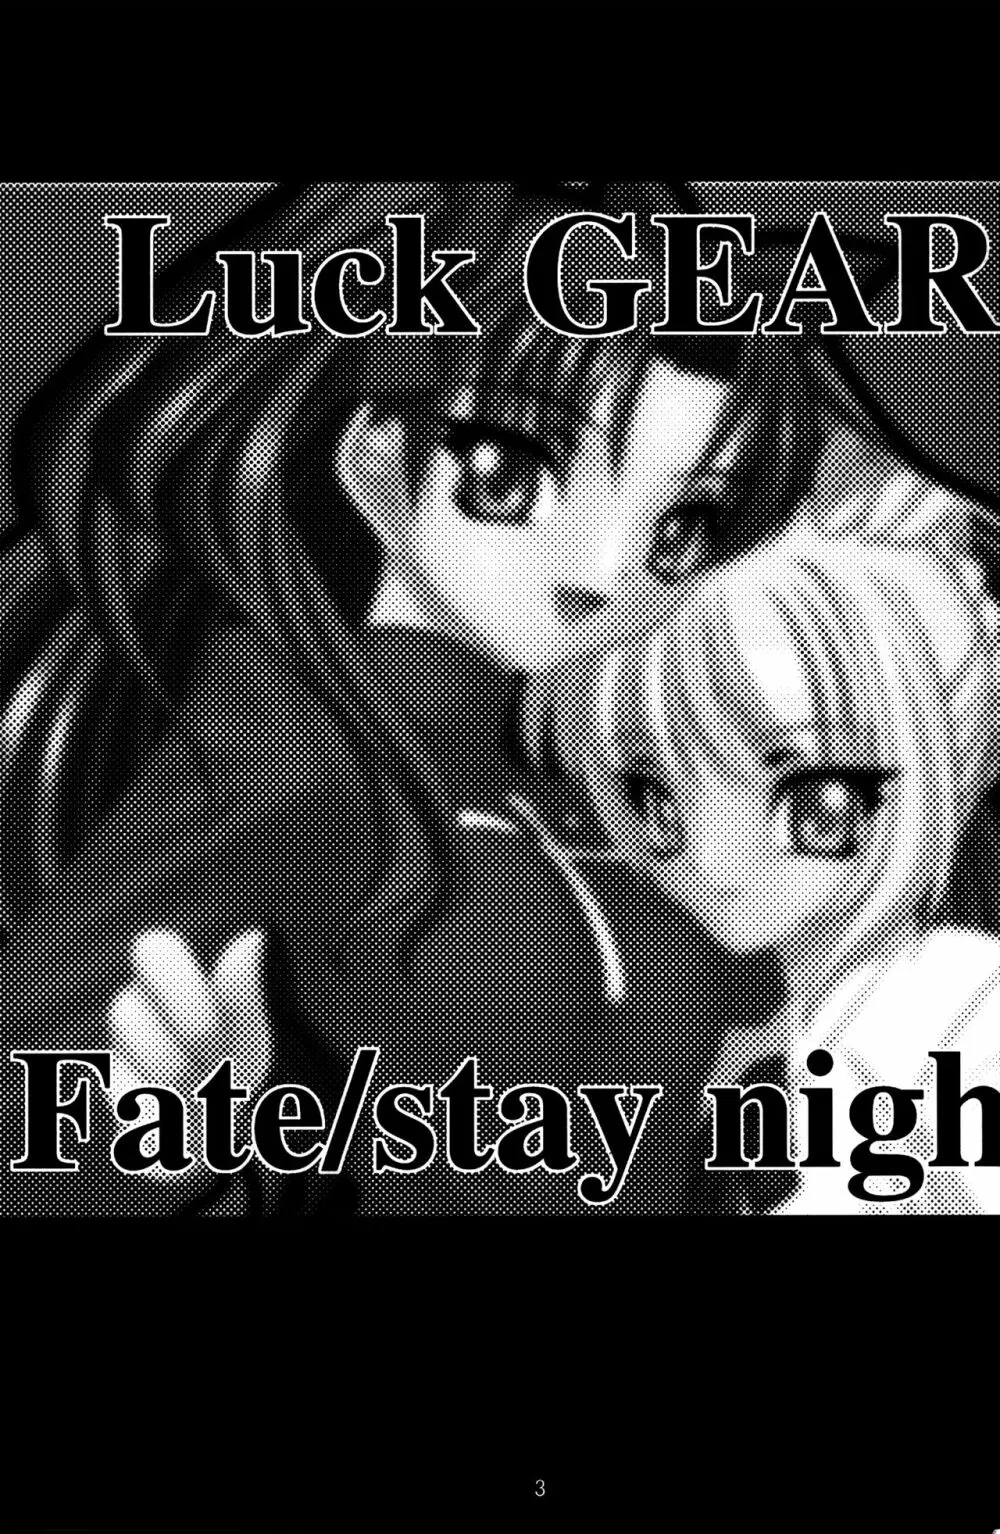 Fate/Luck GEAR material Page.2